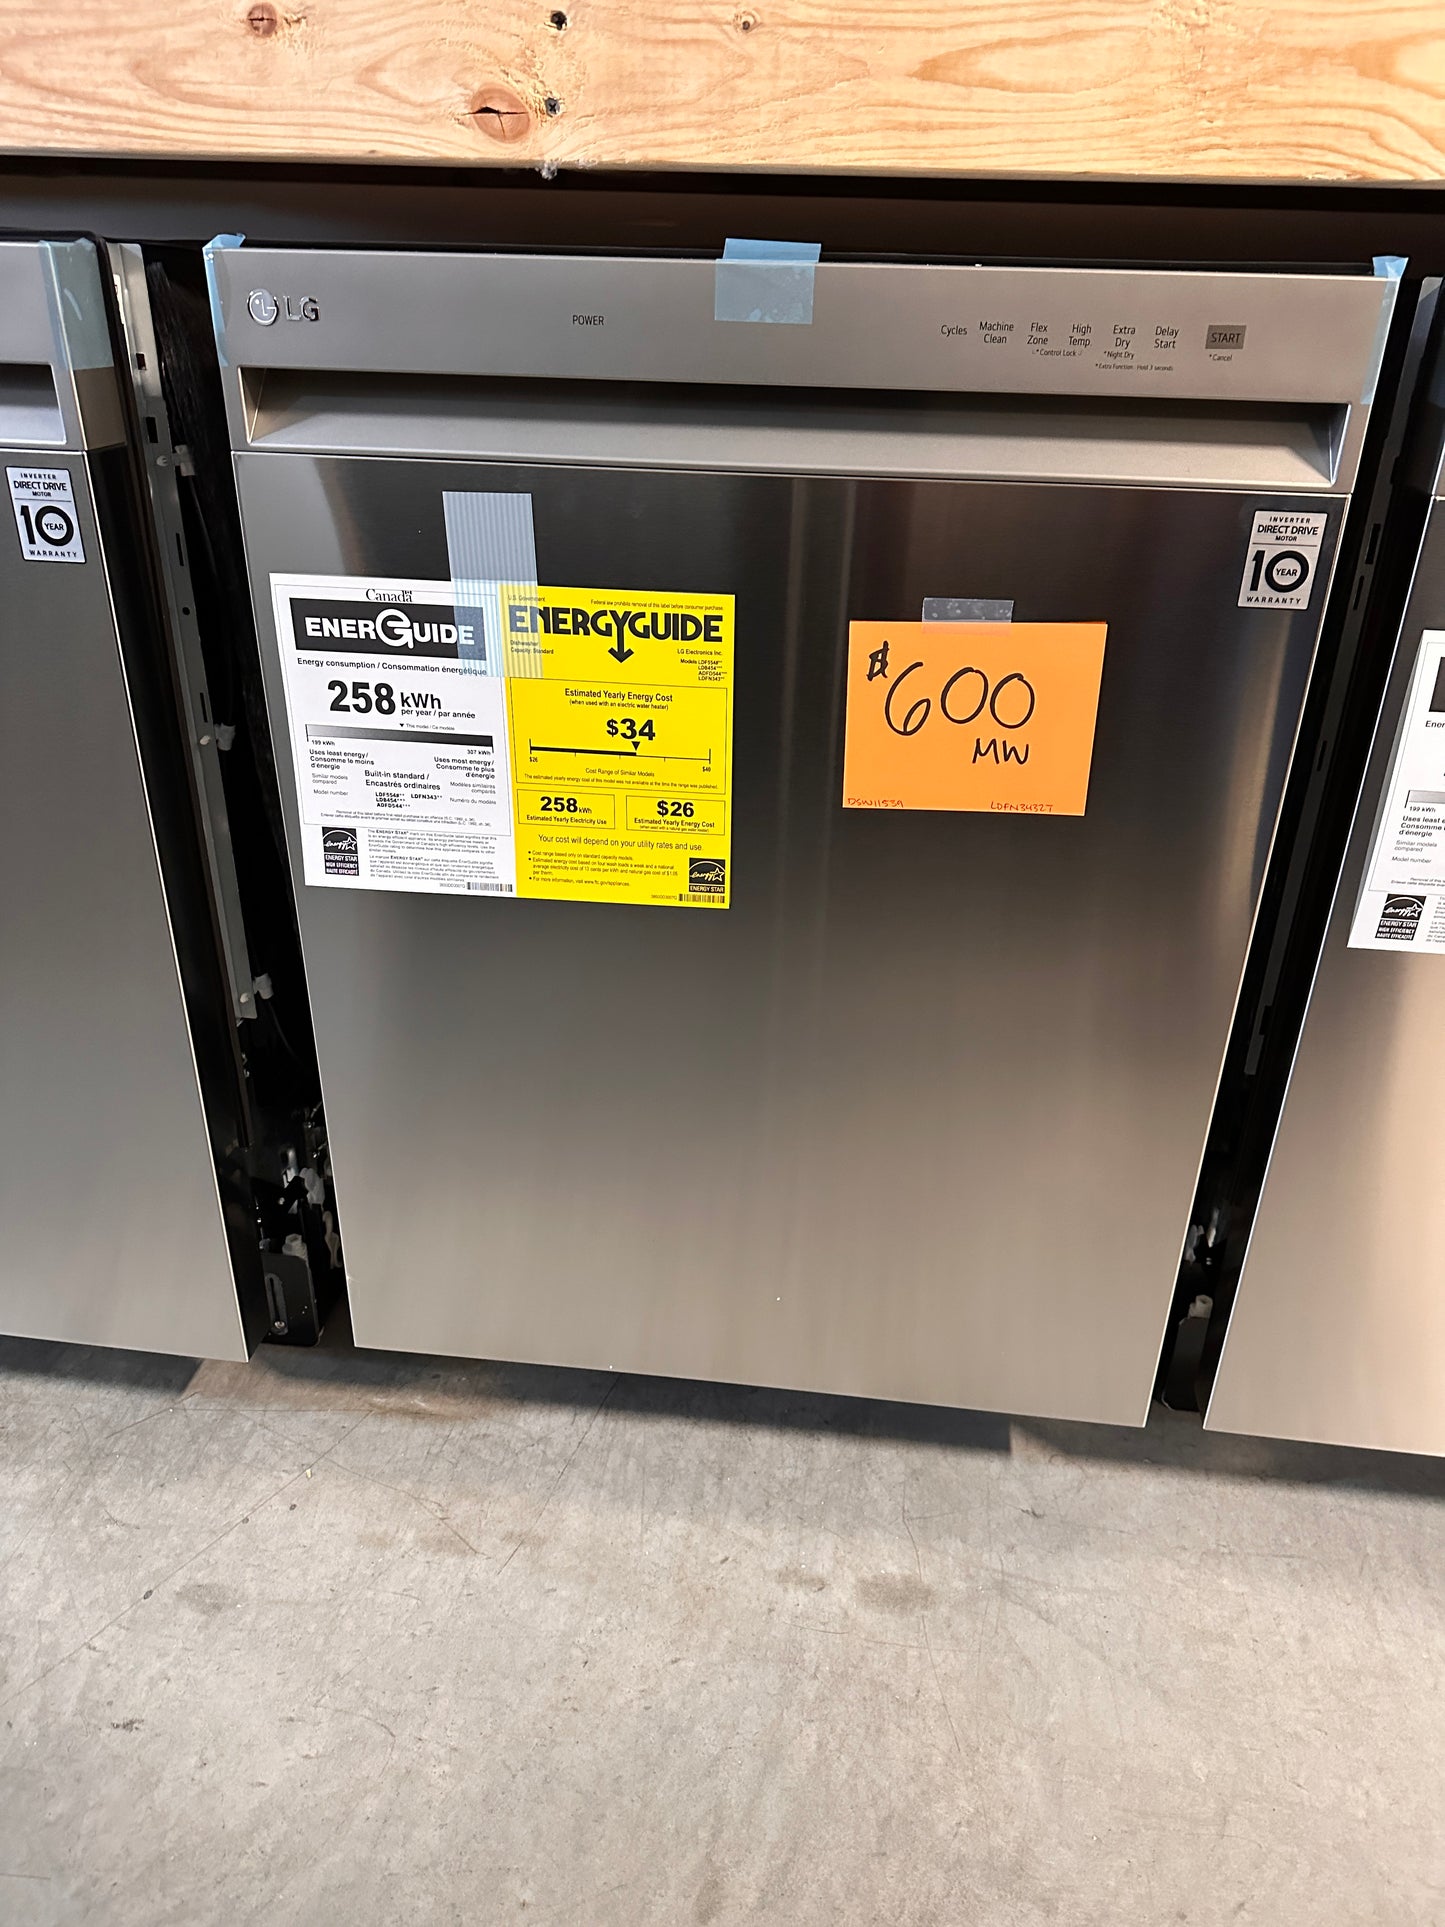 GREAT NEW LG FRONT CONTROL DISHWASHER - DSW11539